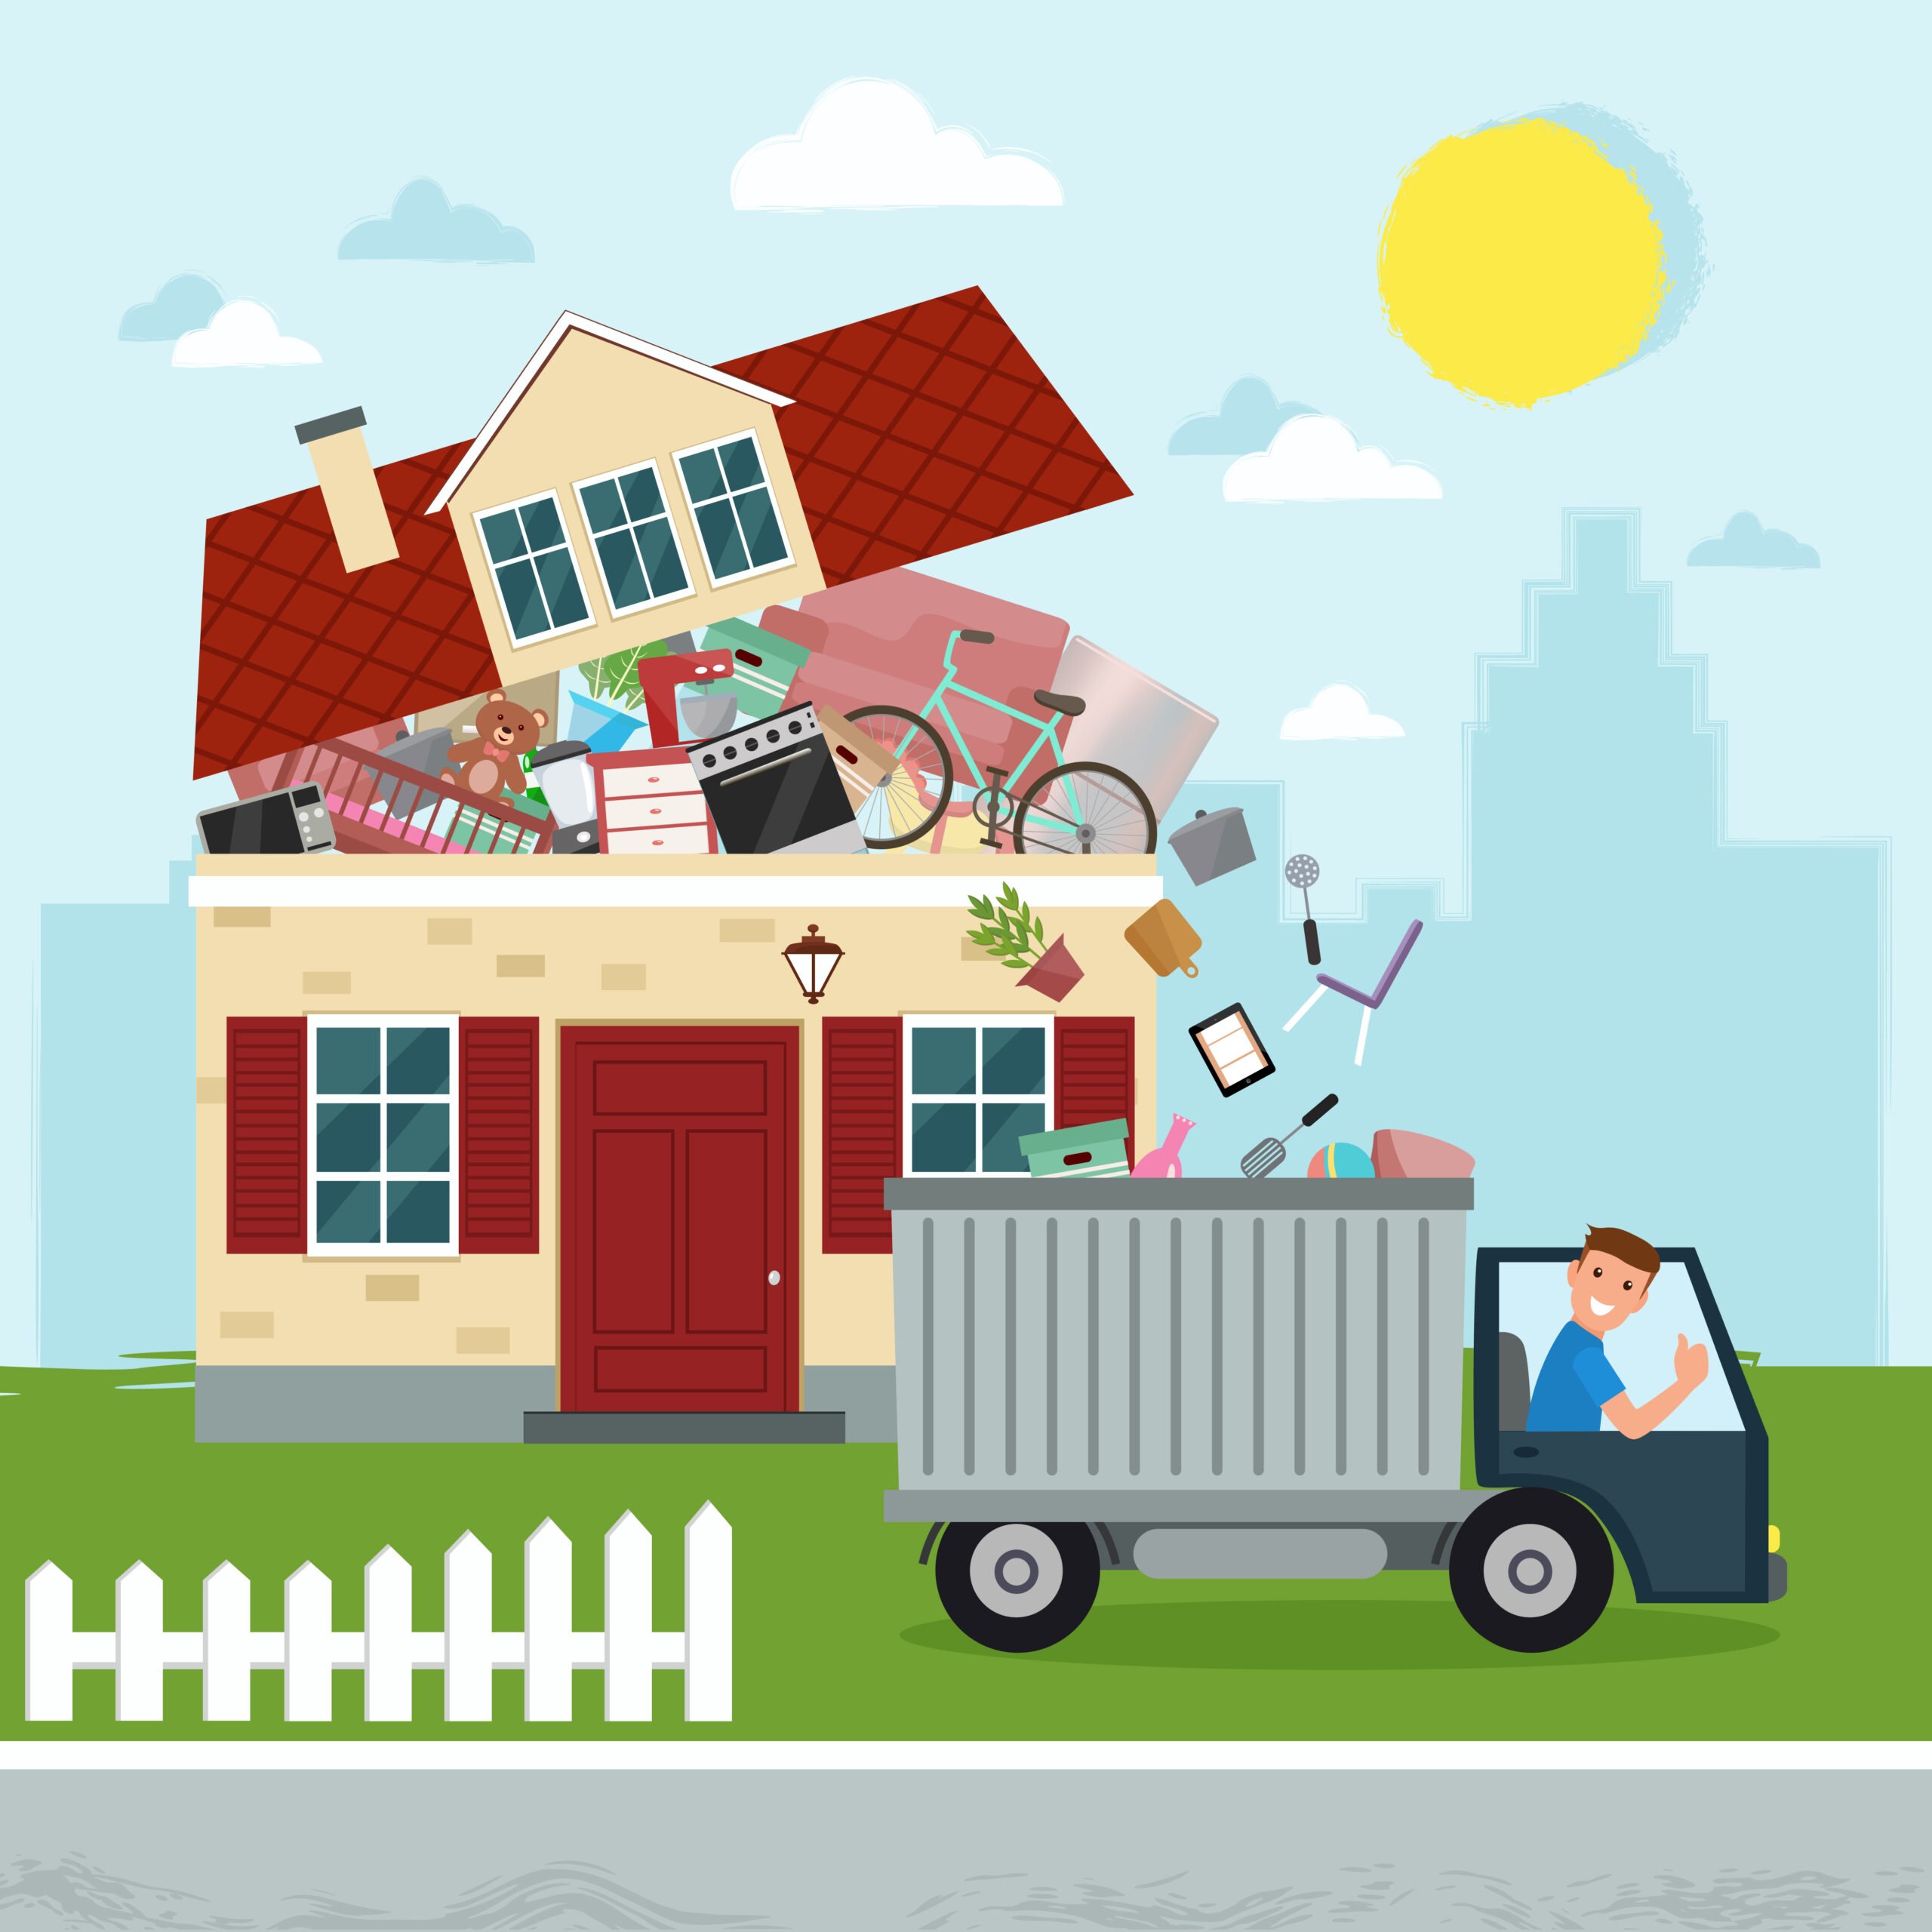 Environmentally-Friendly Junk Removal Services; Junk removal is a necessary service for homeowners and businesses